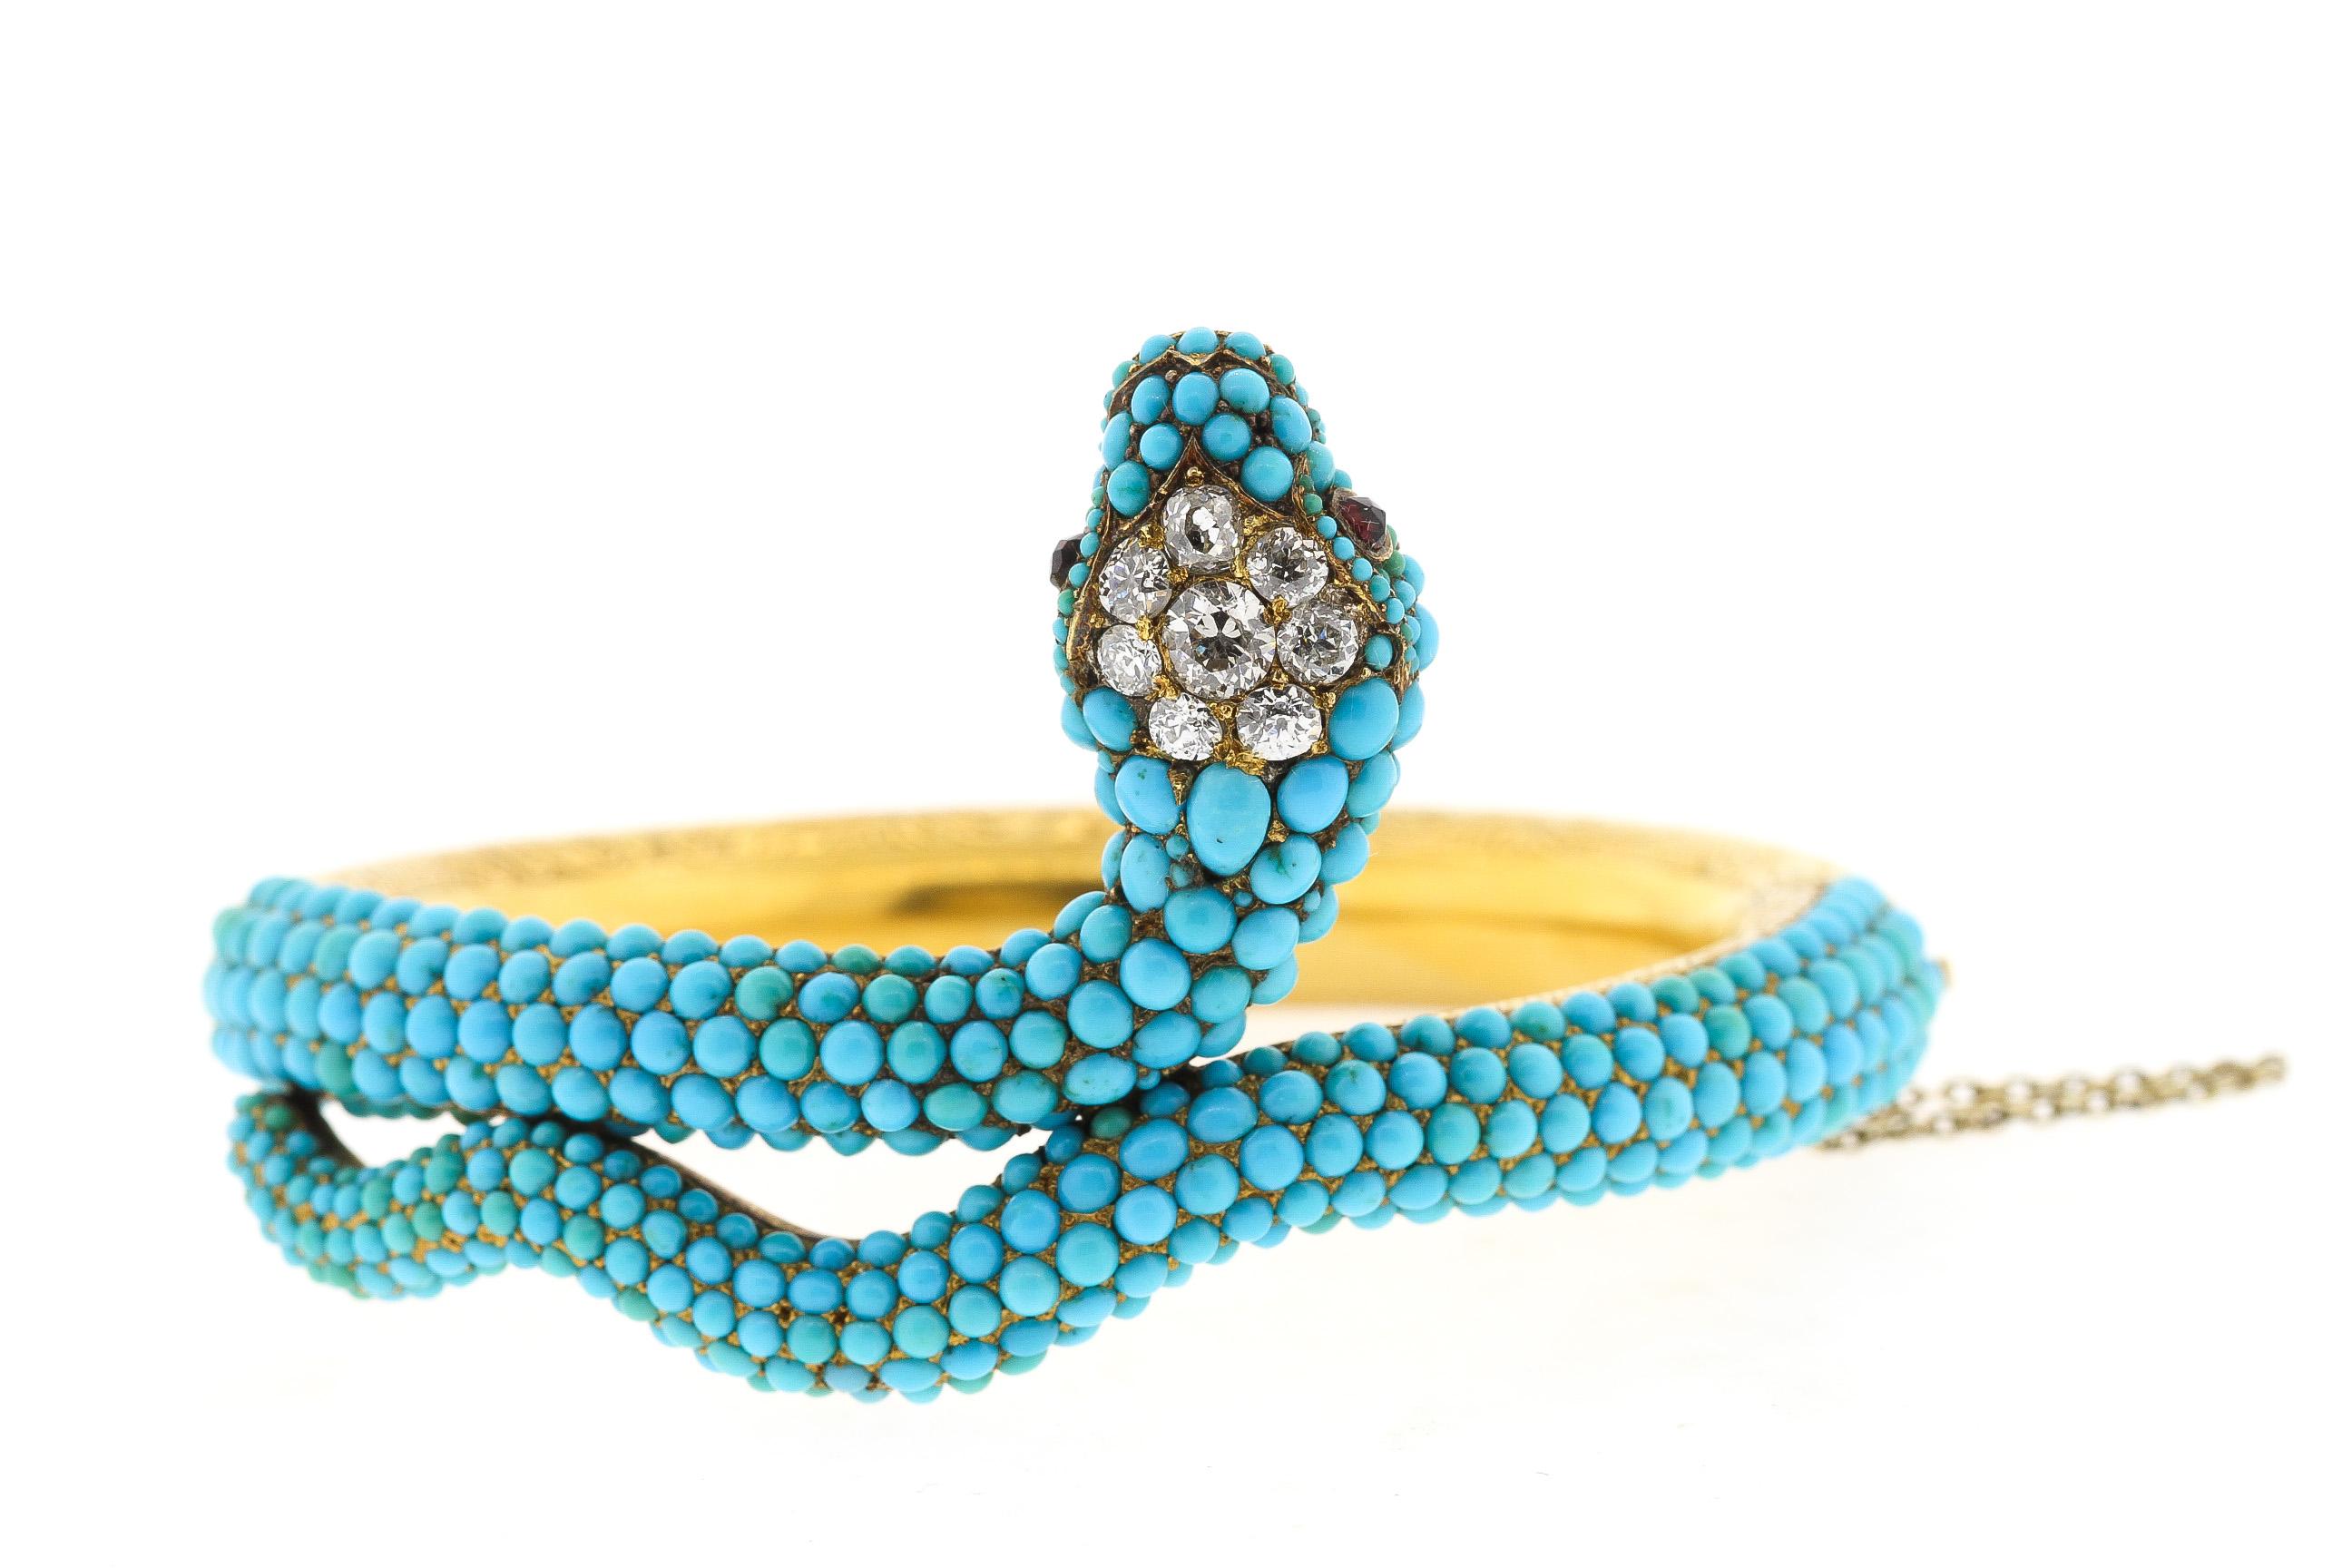 A rare antique Victorian turquoise, and diamond snake bangle bracelet, circa 1880. This bracelet hinges open, the hollow form gold back is beautifully engraved. The top part of the bracelet is set with pave turquoise that are in great condition. The